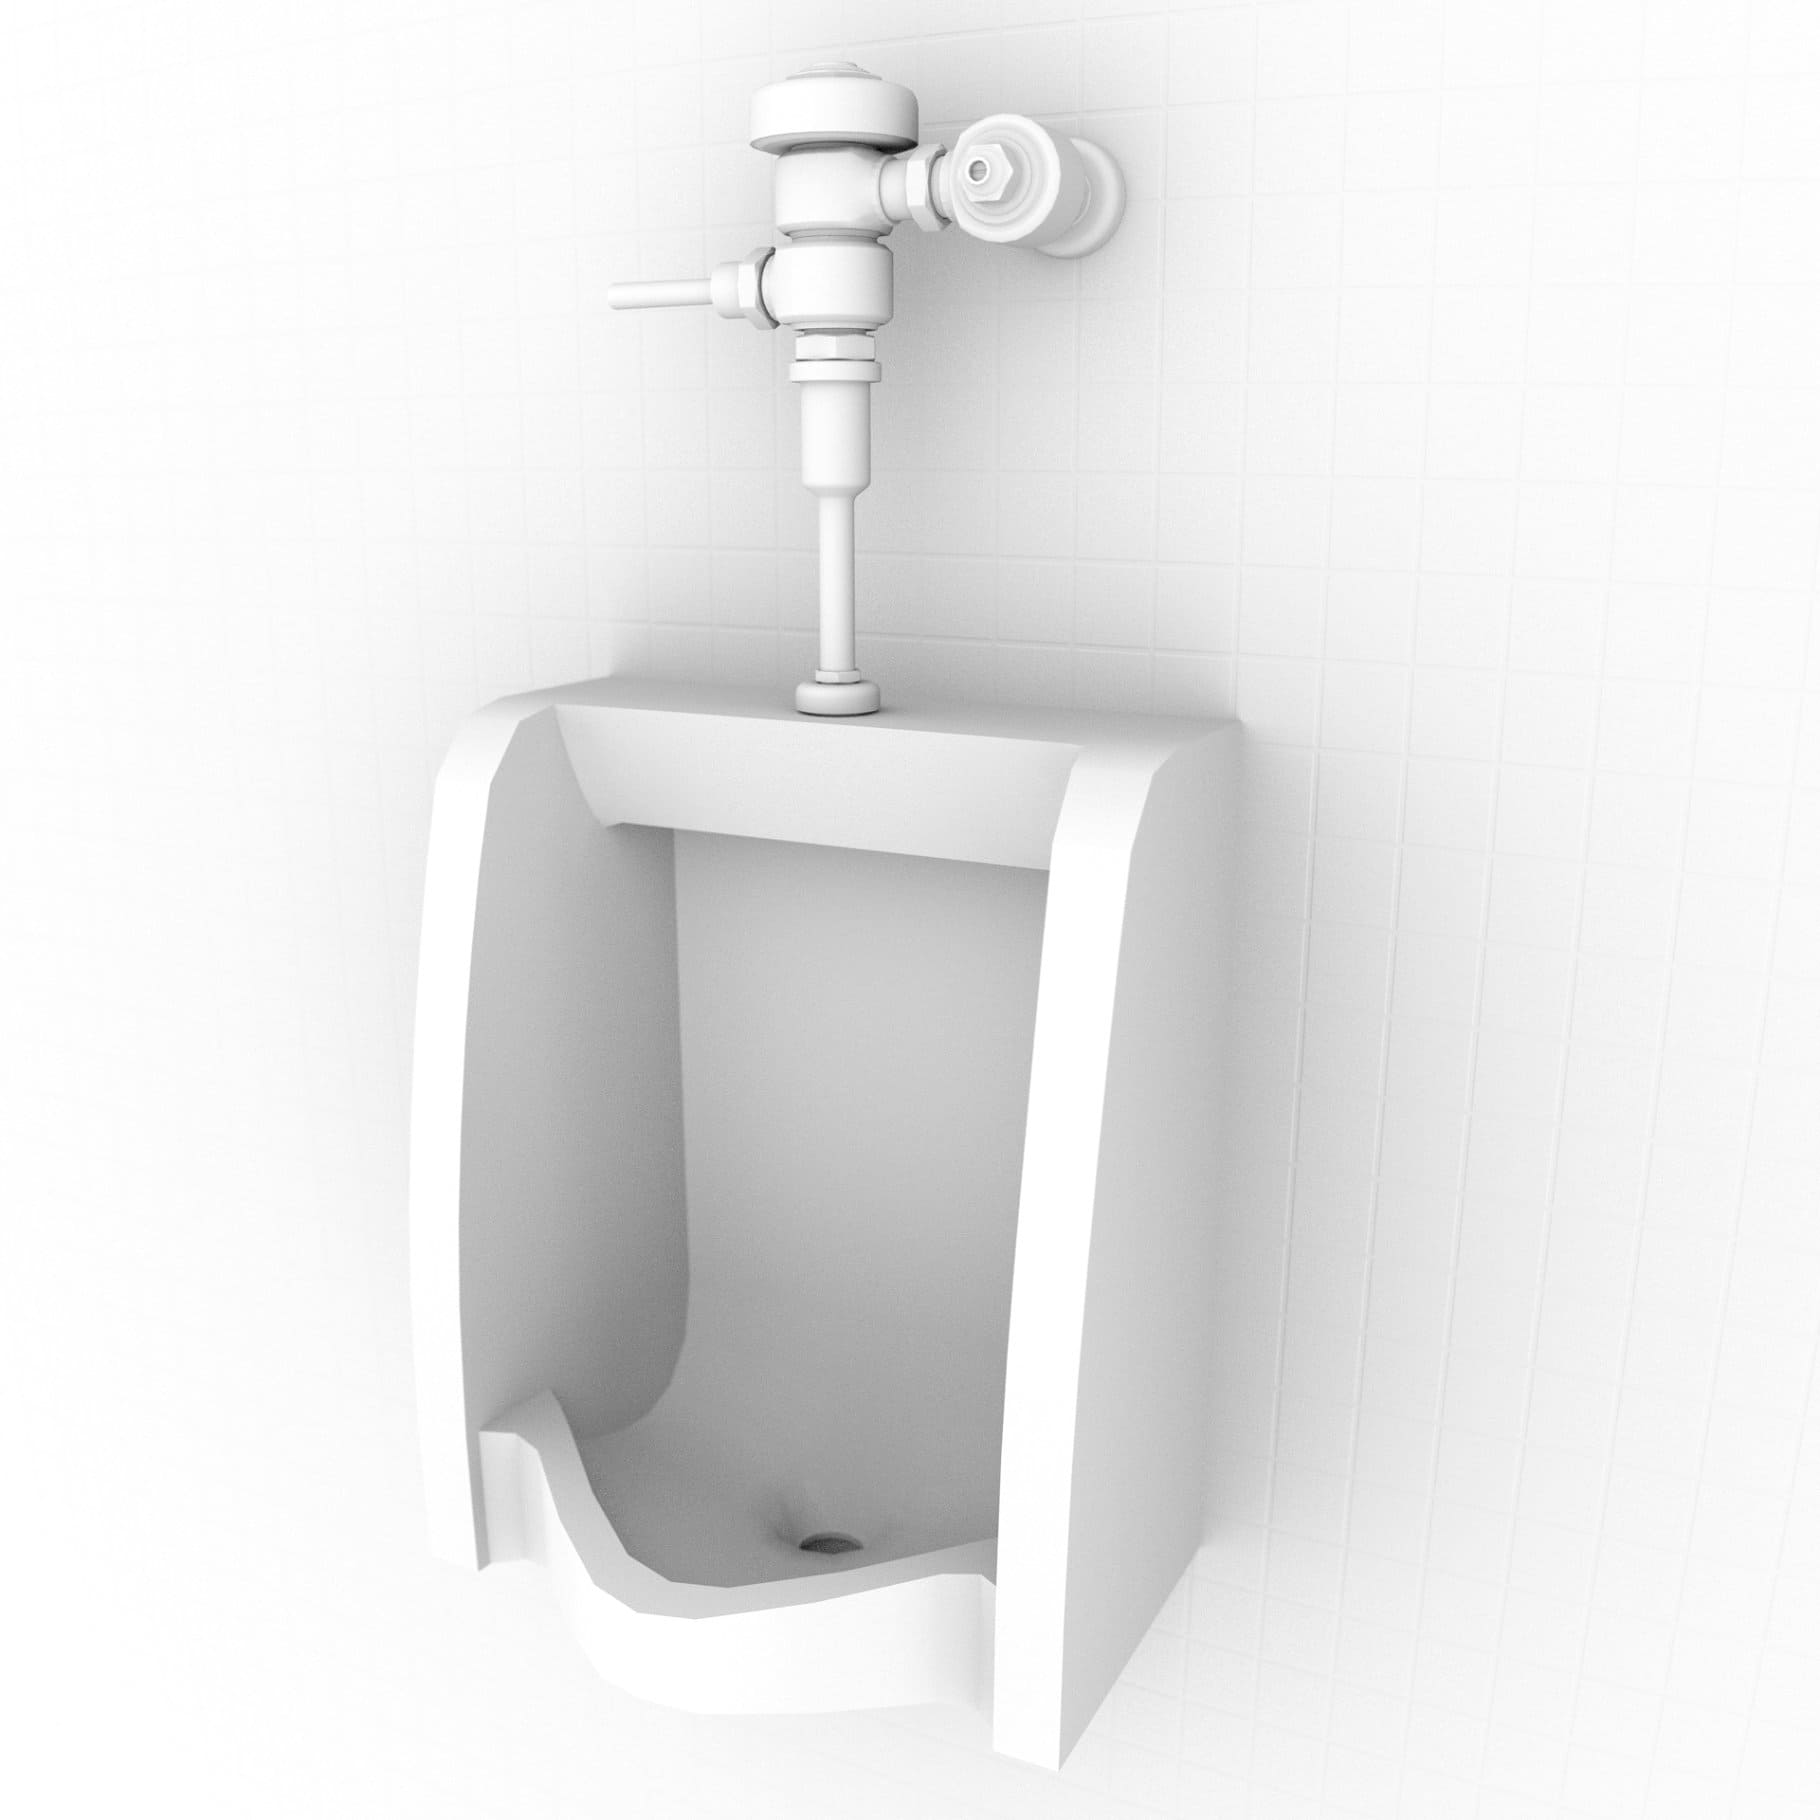 3D model of a urinal in white color.